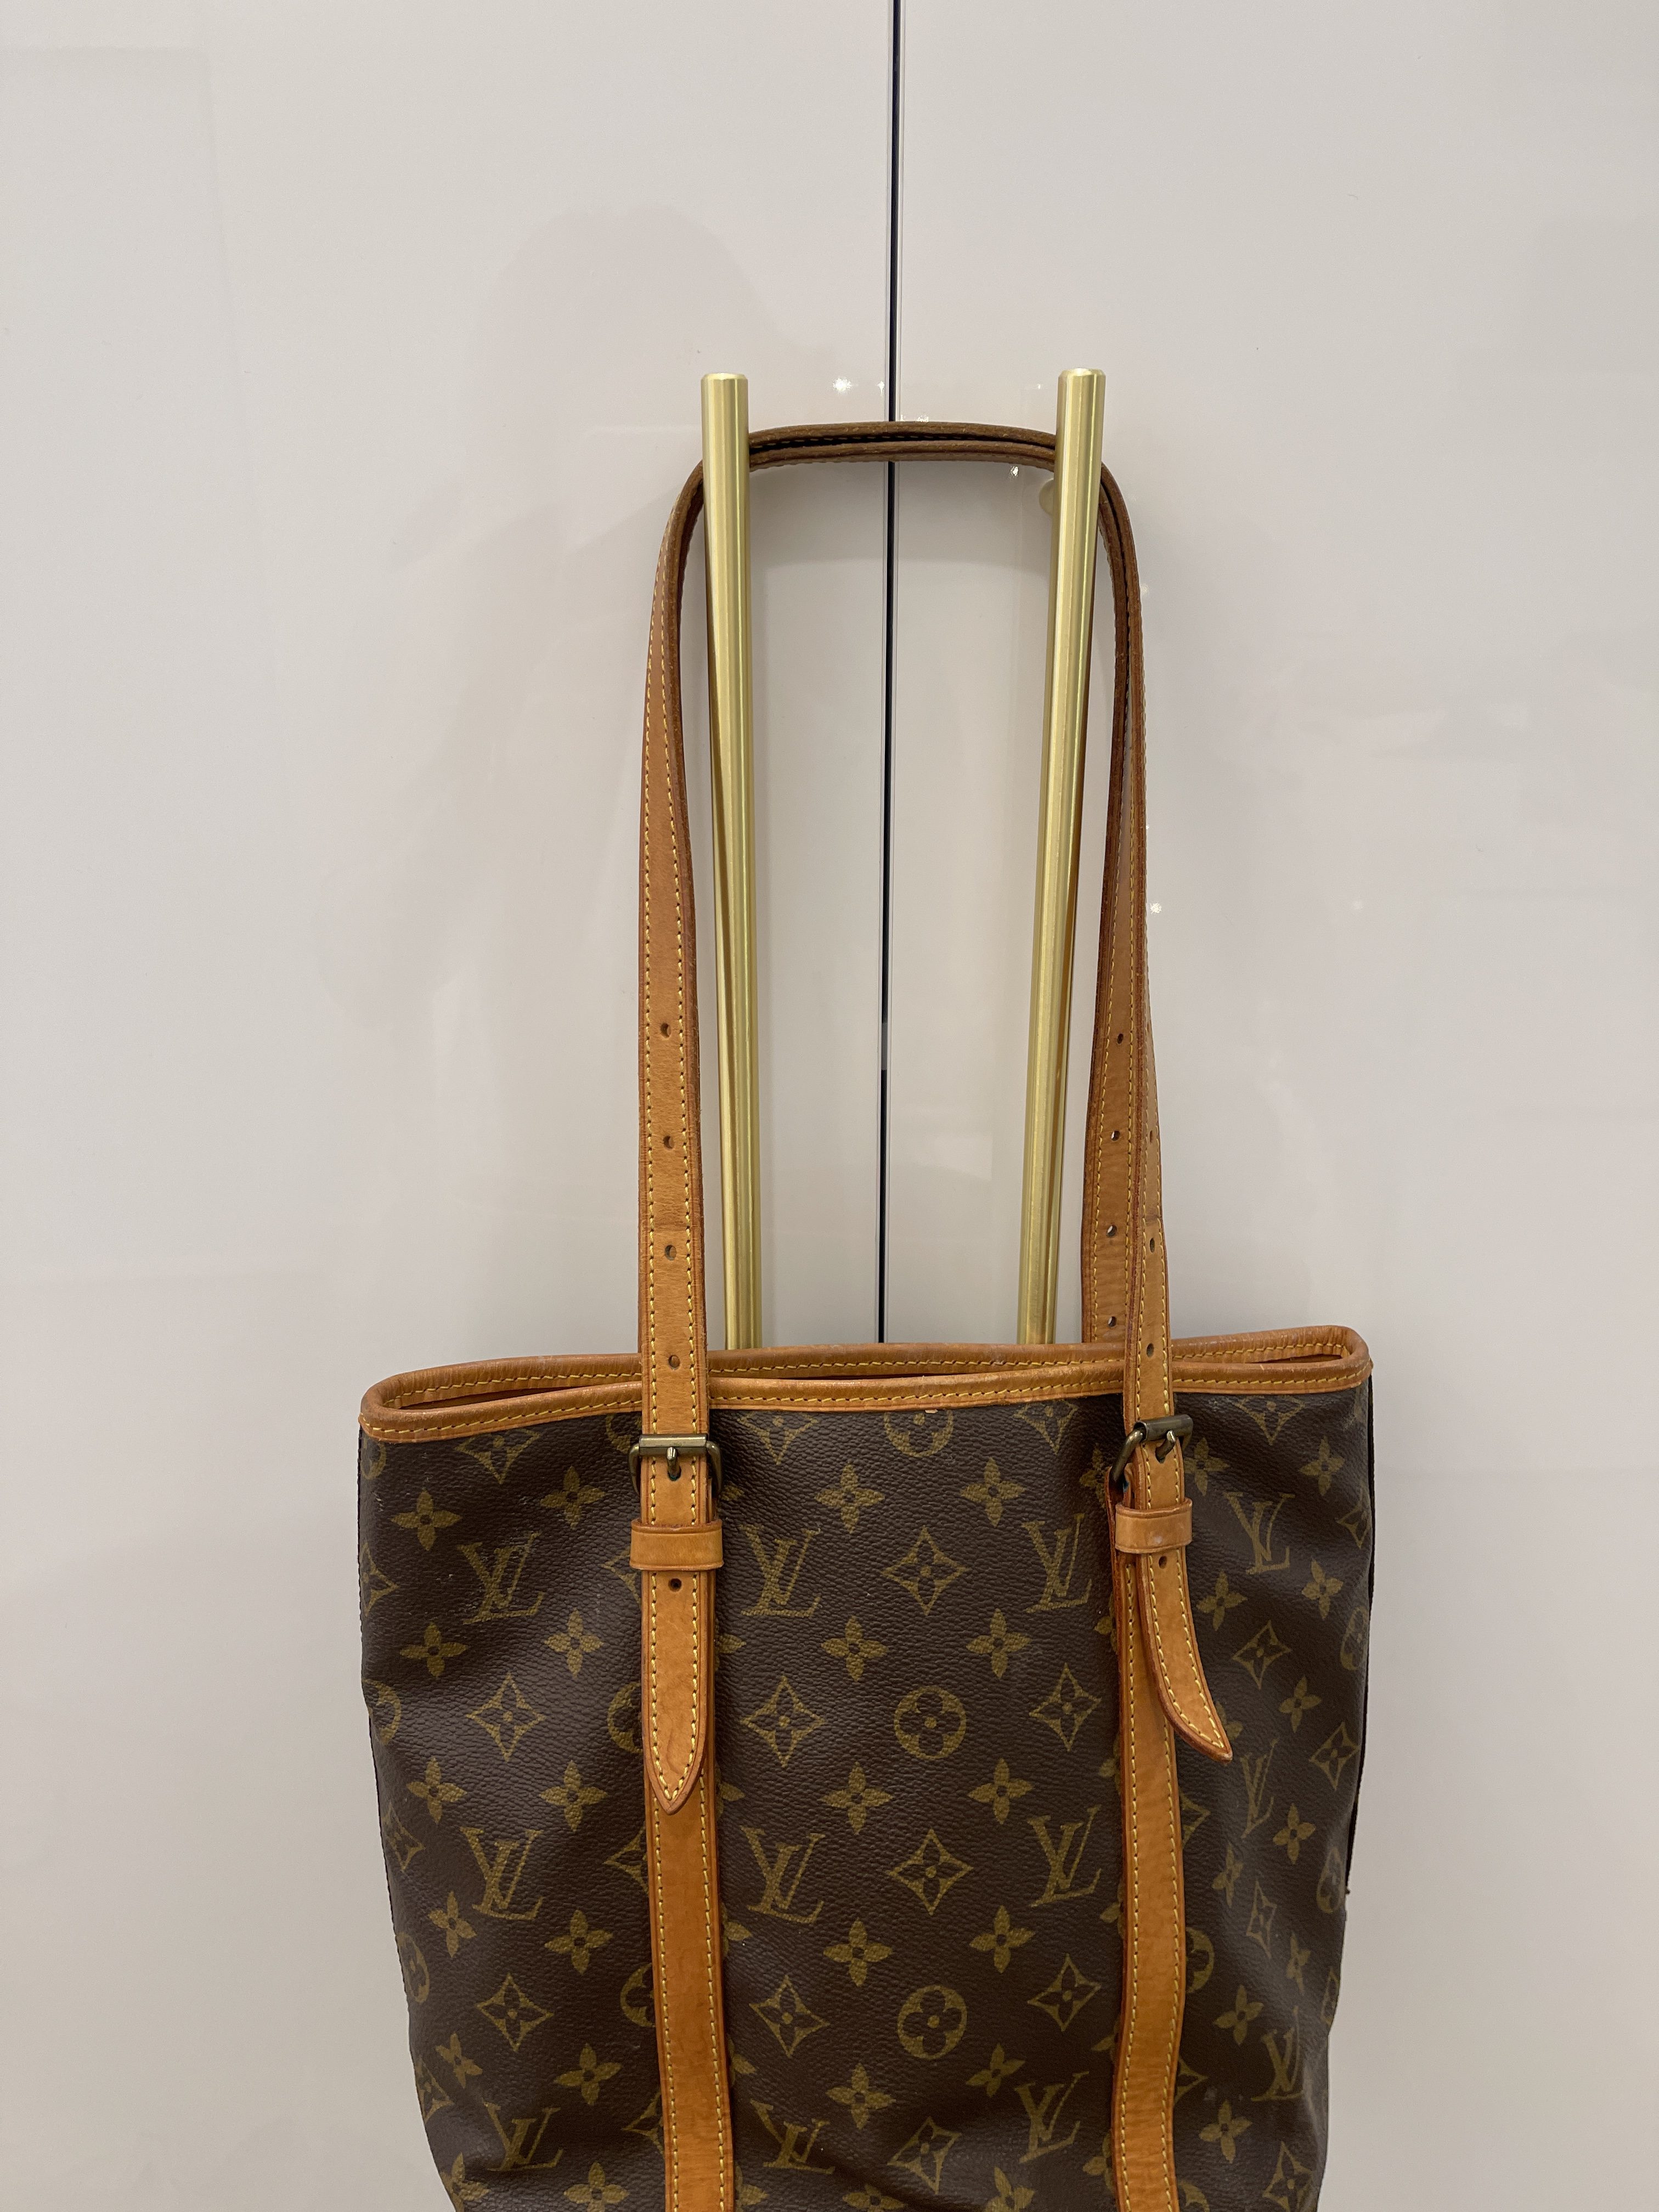 Martin Fella North Melbourne - Louis Vuitton Bucket bags. GM (largest in  the range) made in France June 2005, $520. PM (small) made in France  October 2002. Monogram. #lv #louisvuitton #madeinfrance #luxury #